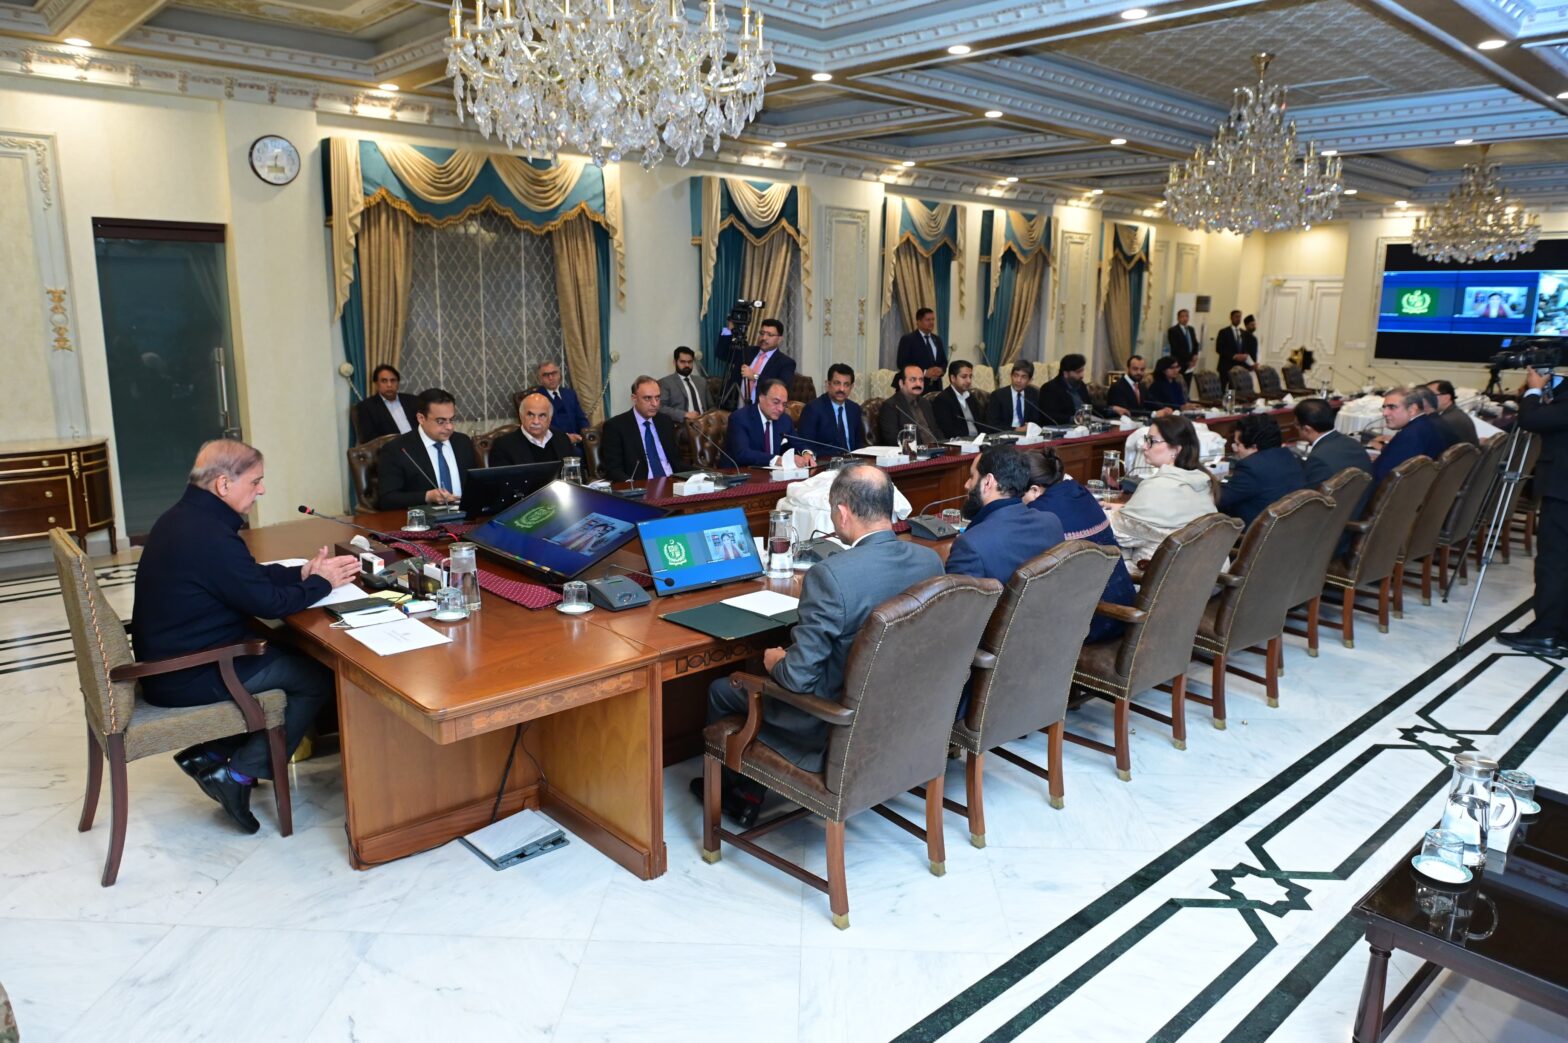 PM directs formulation of proposal to cut govt spending, reform economic structure